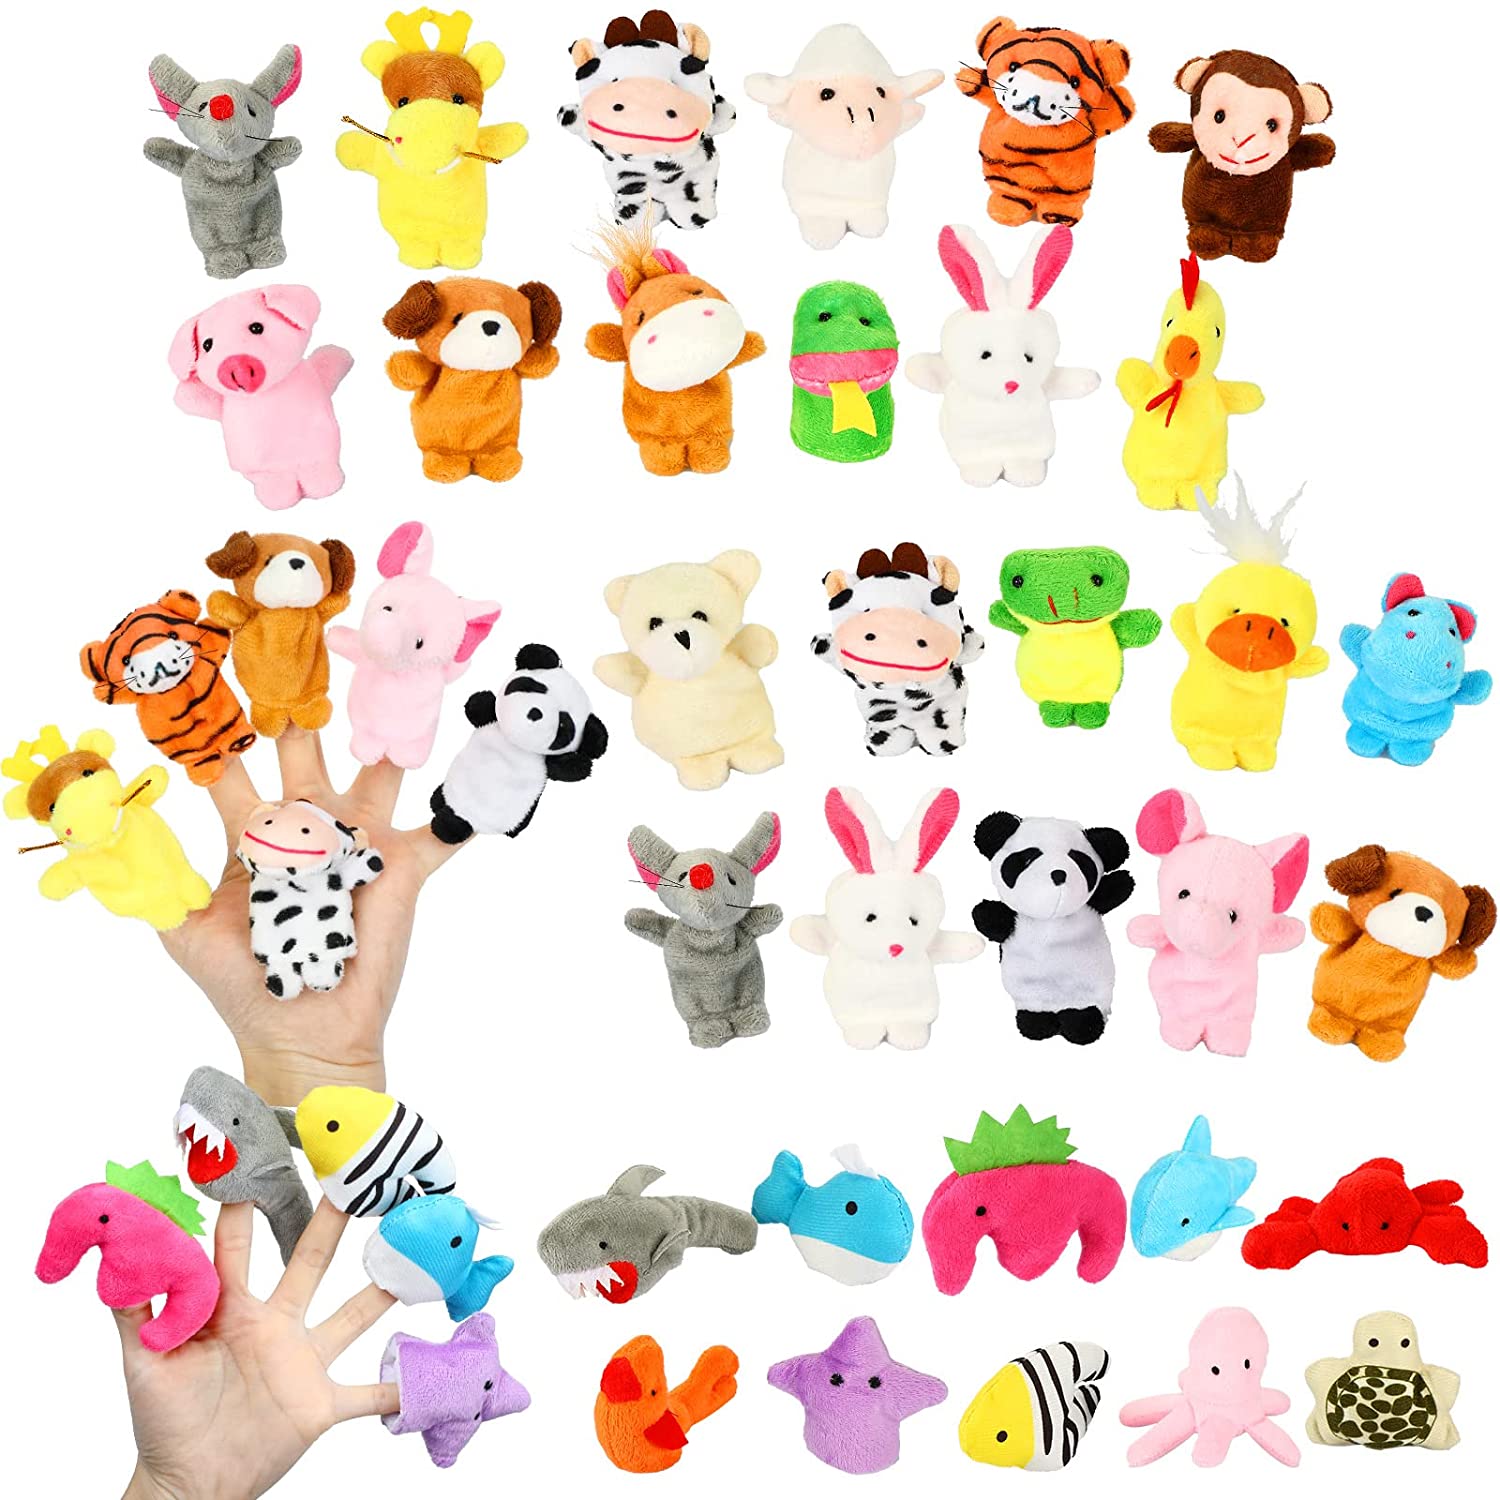 10Pcs Animal Finger Puppets FAIRY TALE STORY TELLING Party Bag Fillers Toys 